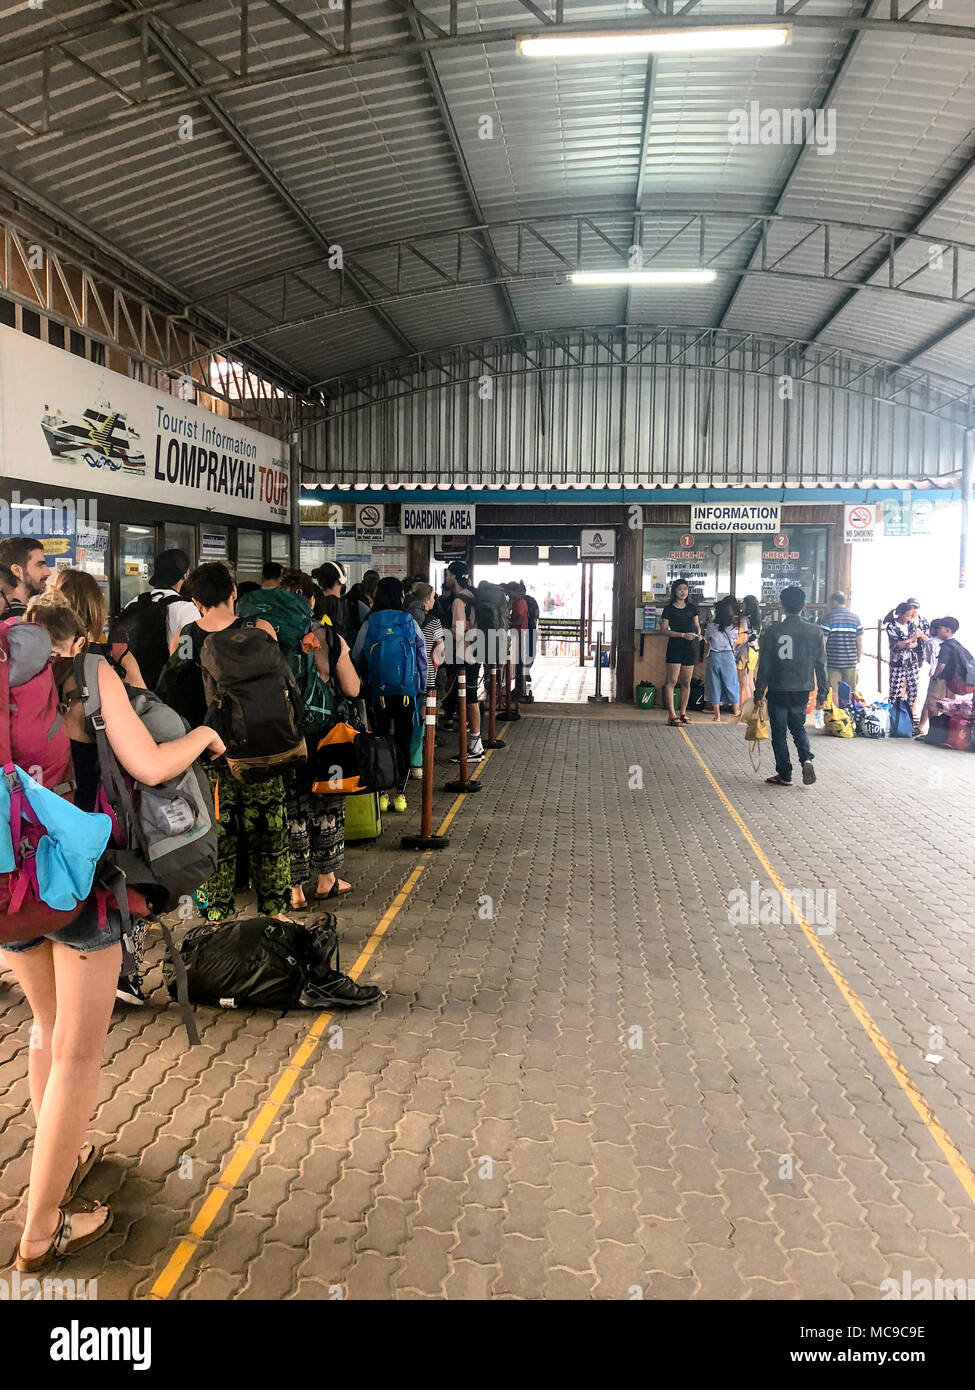 Queue of people for travel, image picture Stock Photo